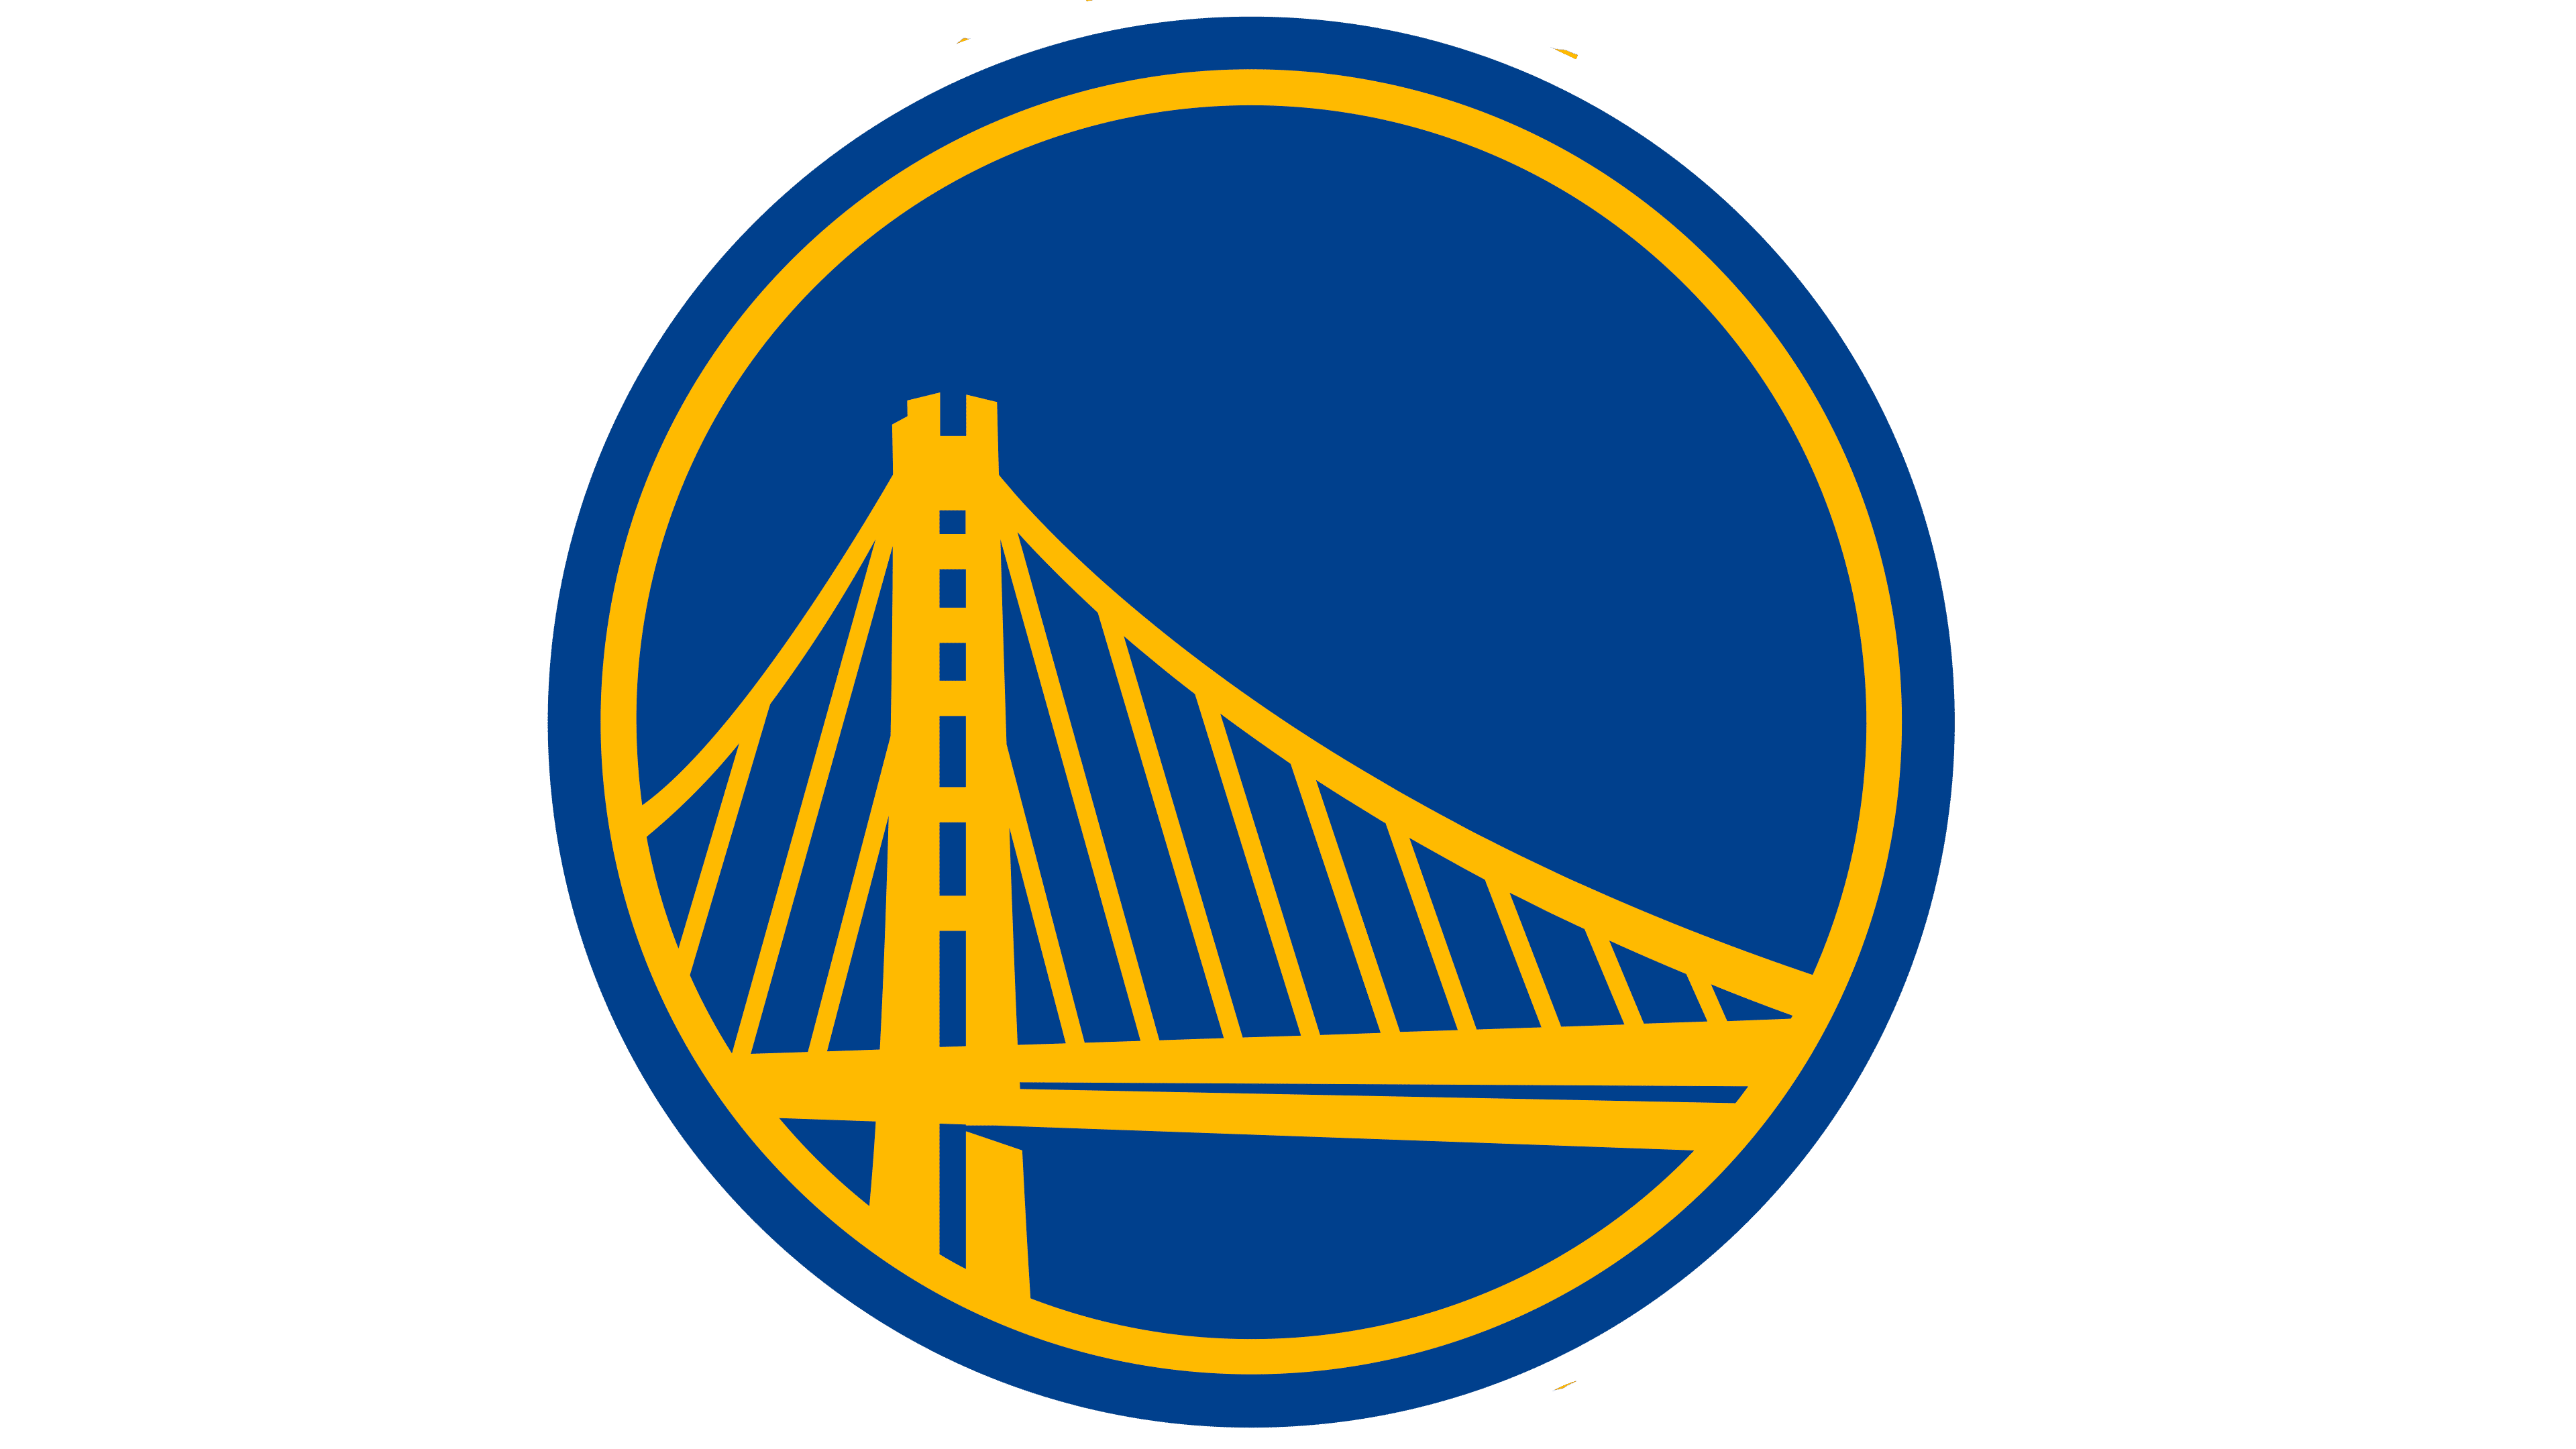 Golden State Warriors Logo, symbol, meaning, history, PNG, brand